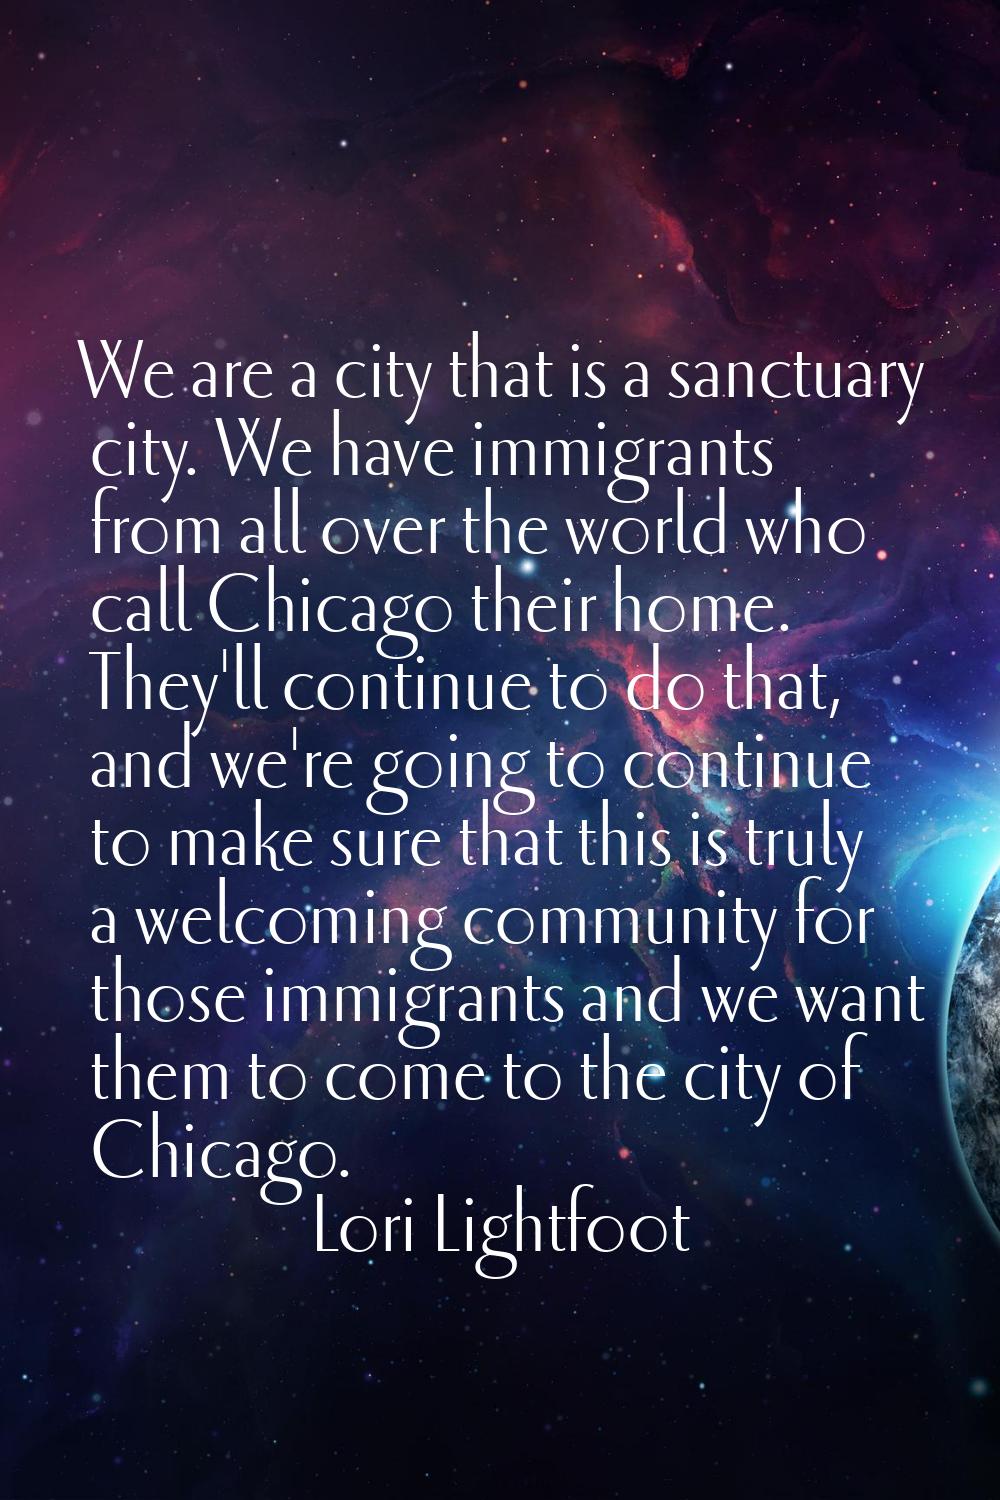 We are a city that is a sanctuary city. We have immigrants from all over the world who call Chicago